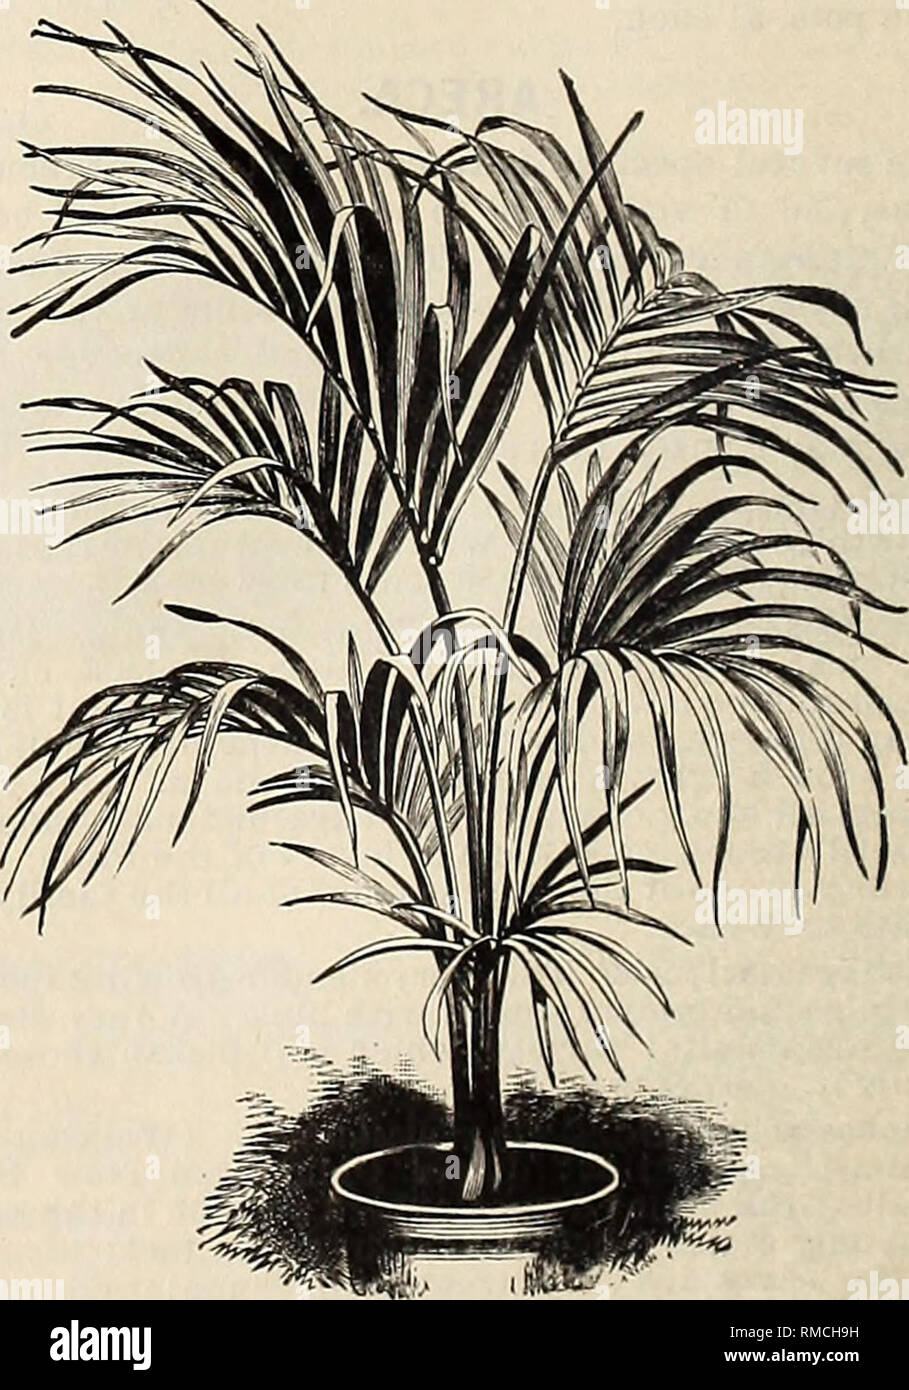 . Annual illustrated and descriptive catalogue of new, rare and beautiful plants and seeds. Nurseries (Horticulture), Florida, Catalogs; Plants, Ornamental, Catalogs; Flowers, Catalogs; Tropical plants, Catalogs; Fruit trees, Seedlings, Catalogs. Chamcsrops ex eels a. CARYOTA. C. aobolifera. Malacca. An elegant, slender-stemmed species; leaves bipinnate, light shining green. 50 cts. to $1.50 each. C. urens. India. (Fish-tail Palm.) The largest growing of the species, and one of the most ornamental. The sap of this species is largely used in making a kind of wine or toddy; hence it is known as  Stock Photo